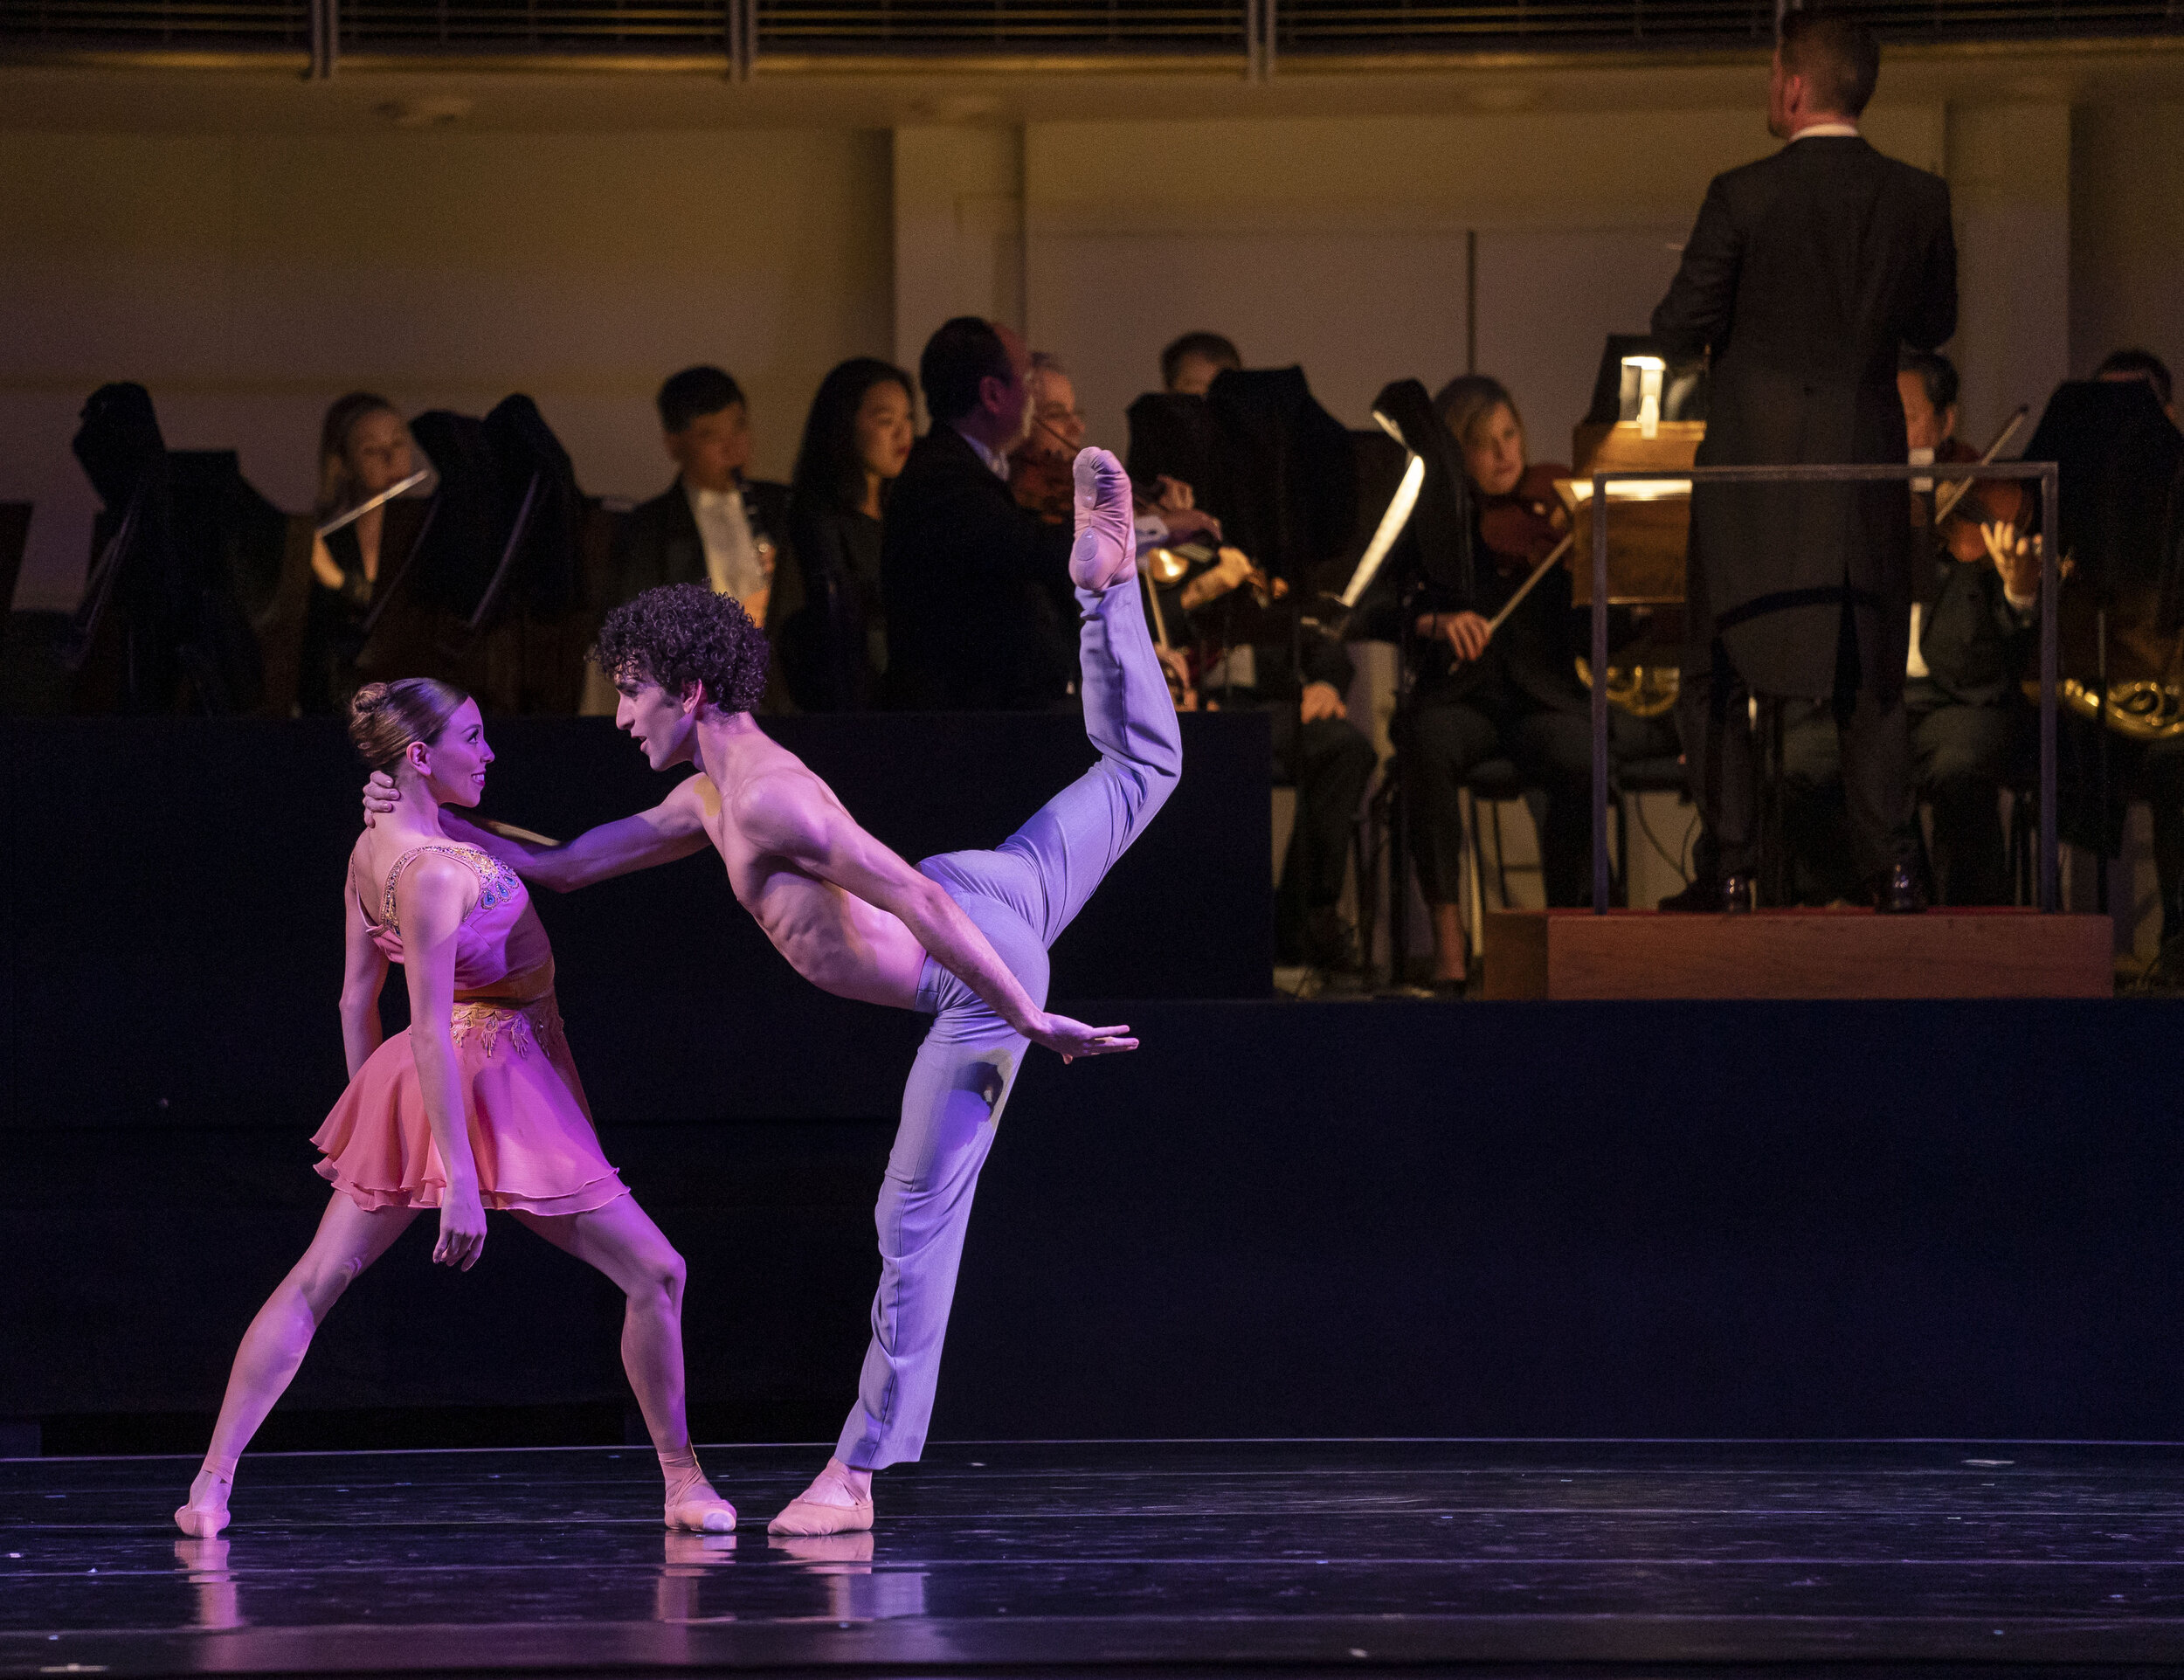 Joffrey Artists Edson Barbosa and Anais Bueno in “Bliss!” by Stephanie Martinez. Photo by Todd Rosenberg Photography